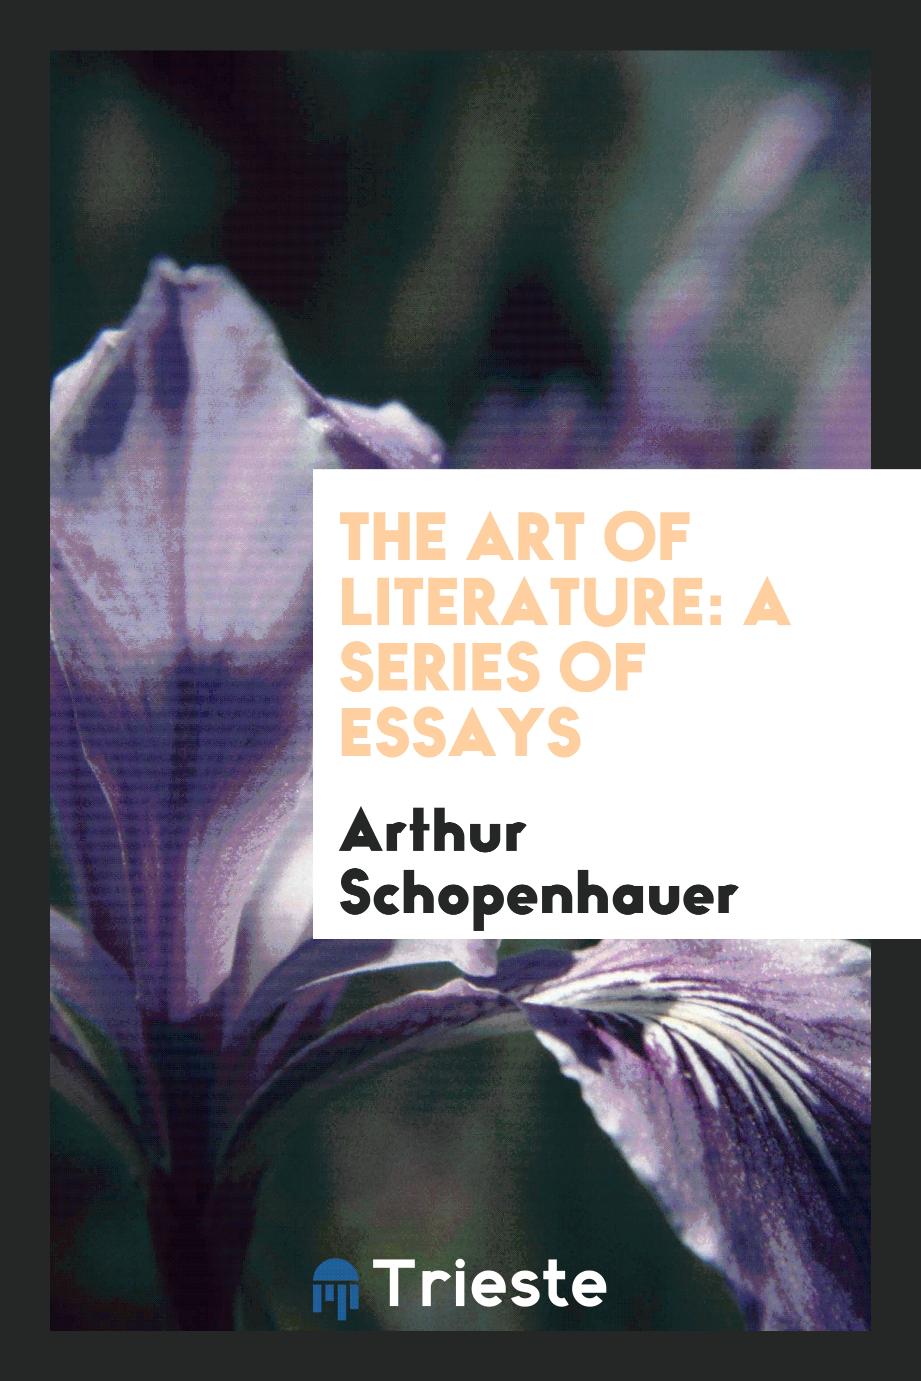 The Art of Literature: A Series of Essays